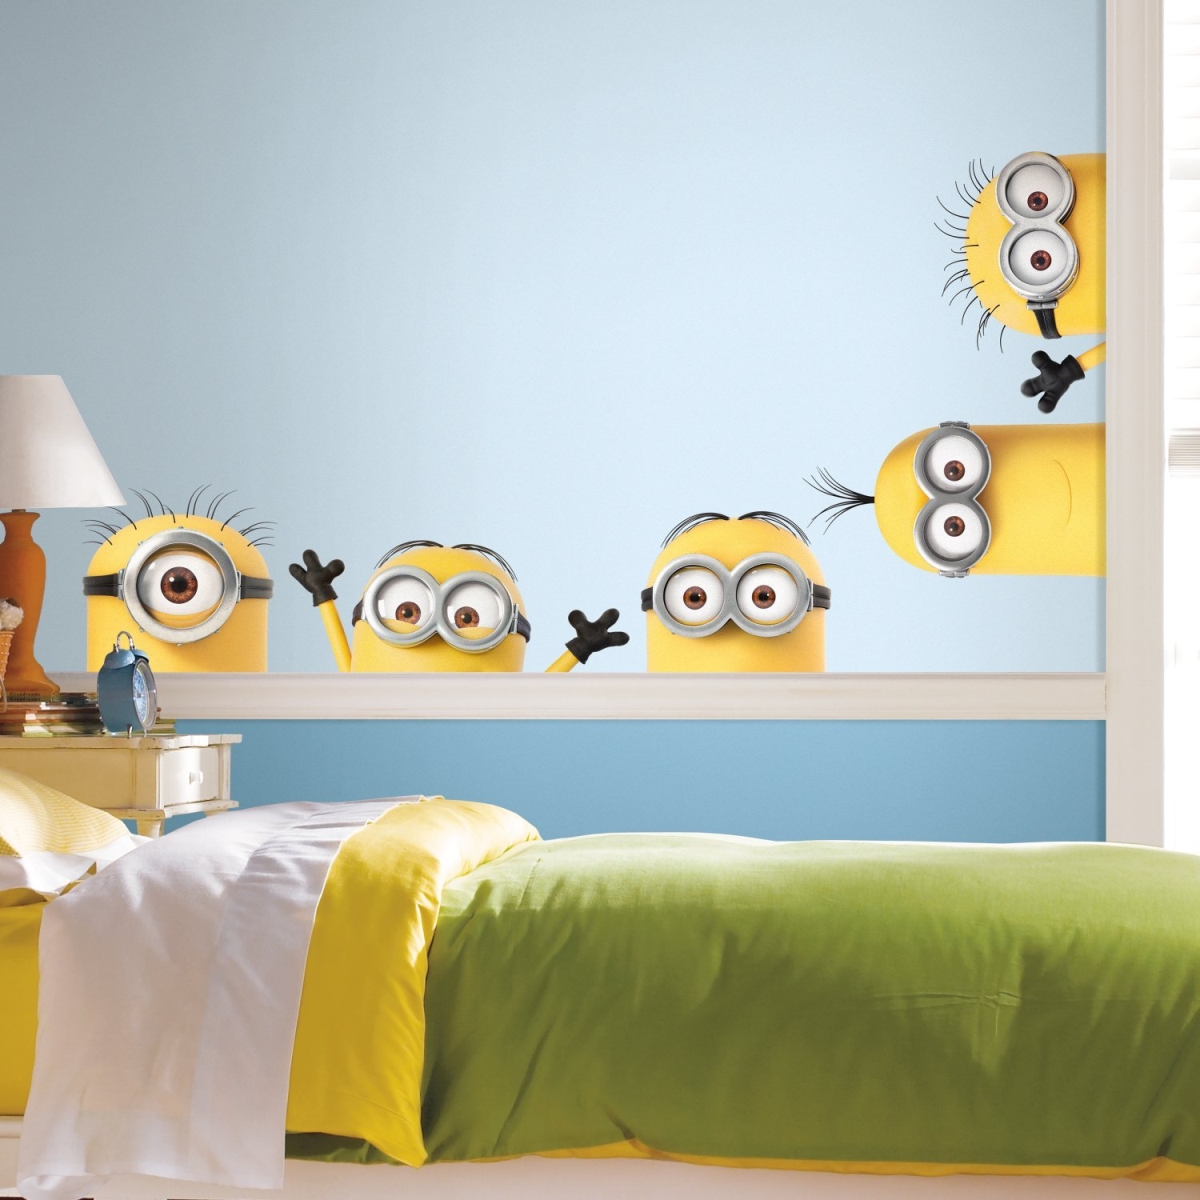 Despicable Me 3 Peel & Stick Wall Decals With Dry Erase, Yellow, Black & White